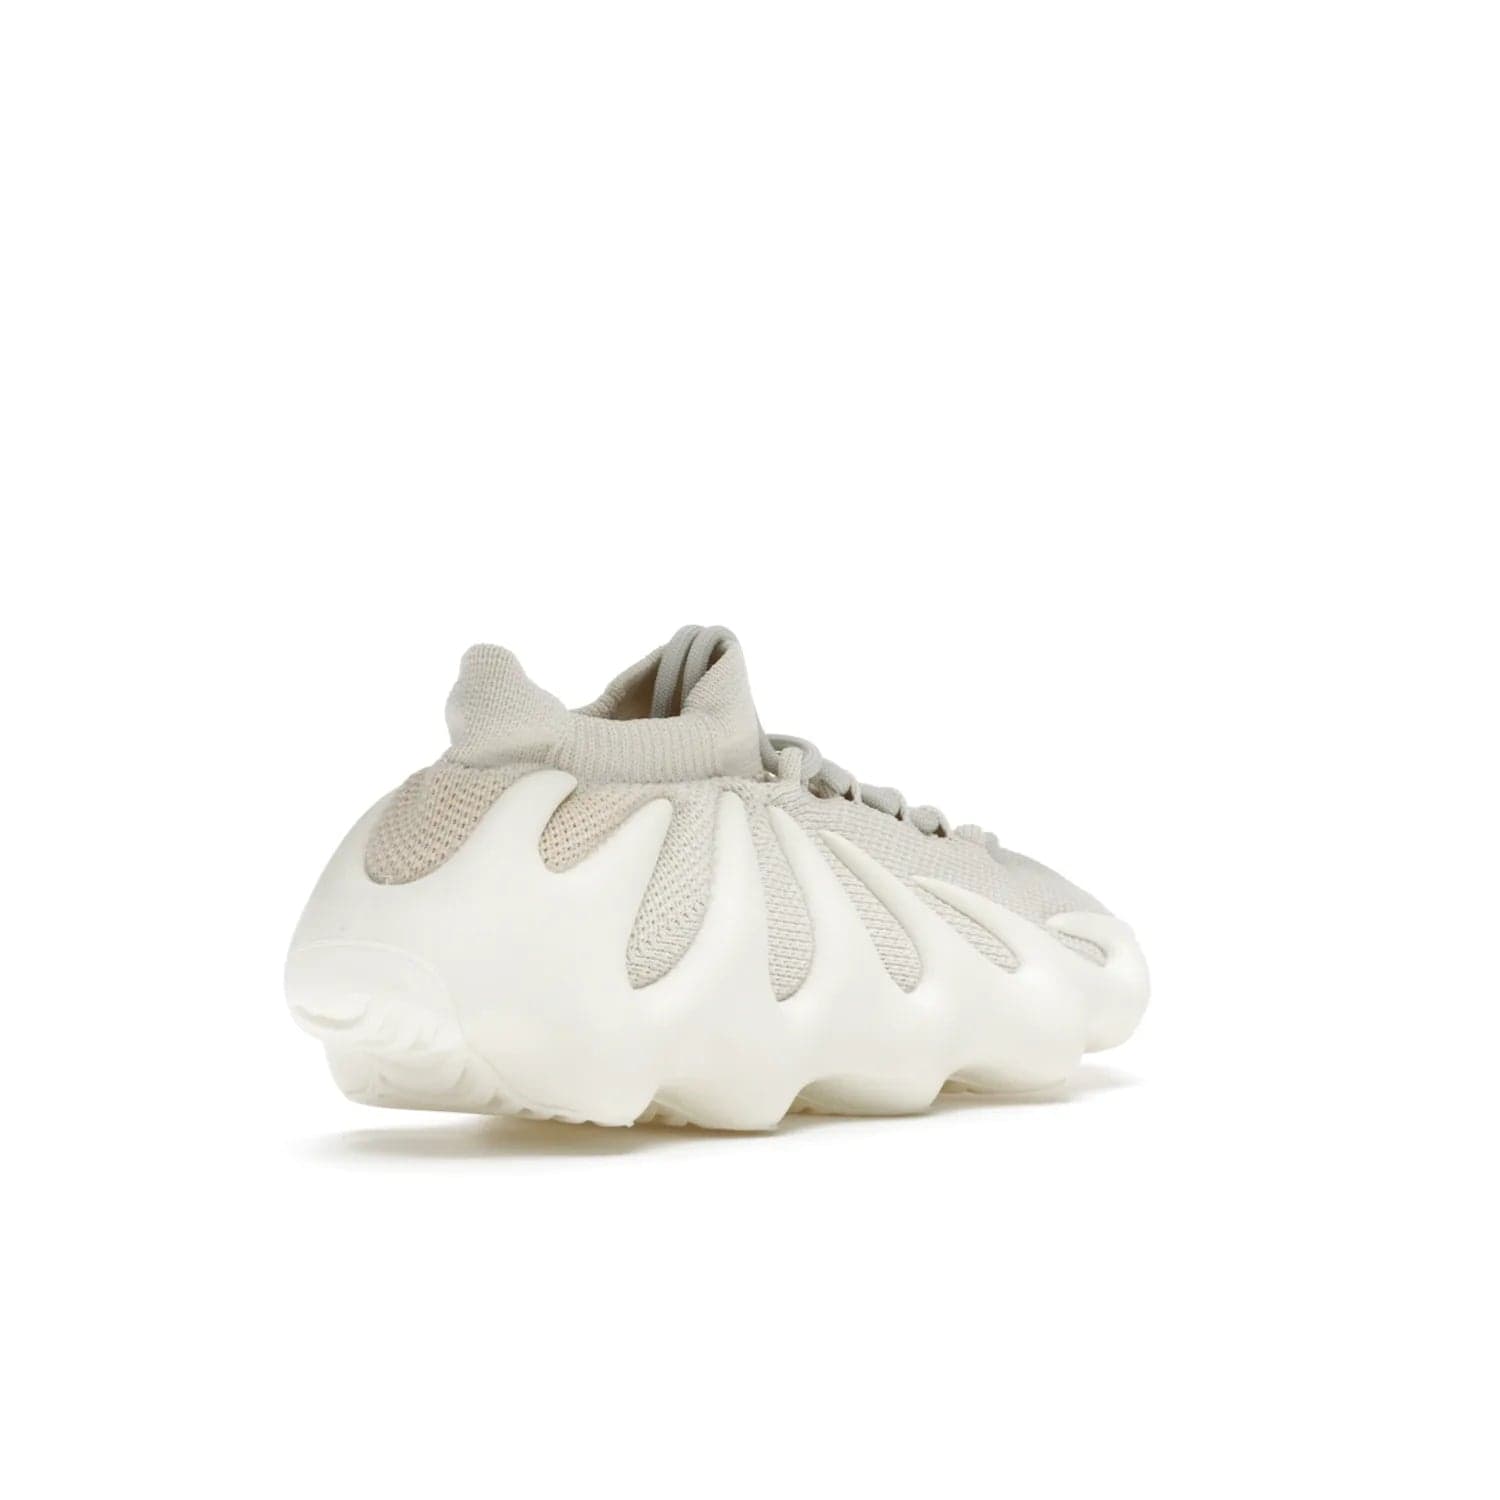 adidas Yeezy 450 Cloud White - Image 32 - Only at www.BallersClubKickz.com - Experience the future with the adidas Yeezy 450 Cloud White. A two-piece design featuring an extreme foam sole and mesh upper, this silhouette is expected to release in March 2021. Get your hands on this striking Cloud White/Cloud White colorway and stand out in the crowd.